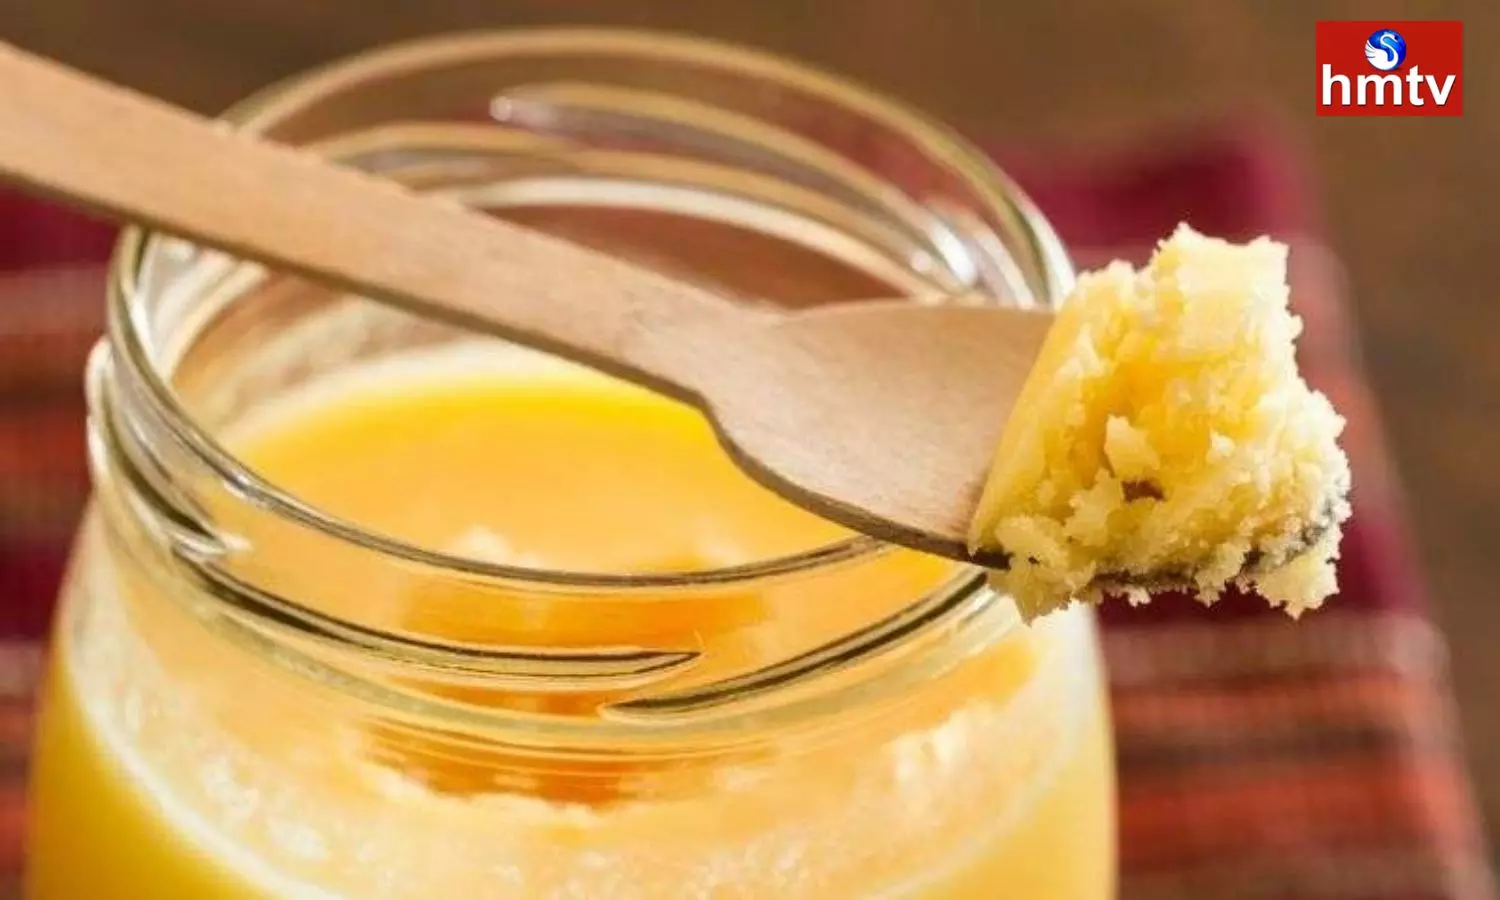 How to distinguish between pure ghee and adulterated ghee